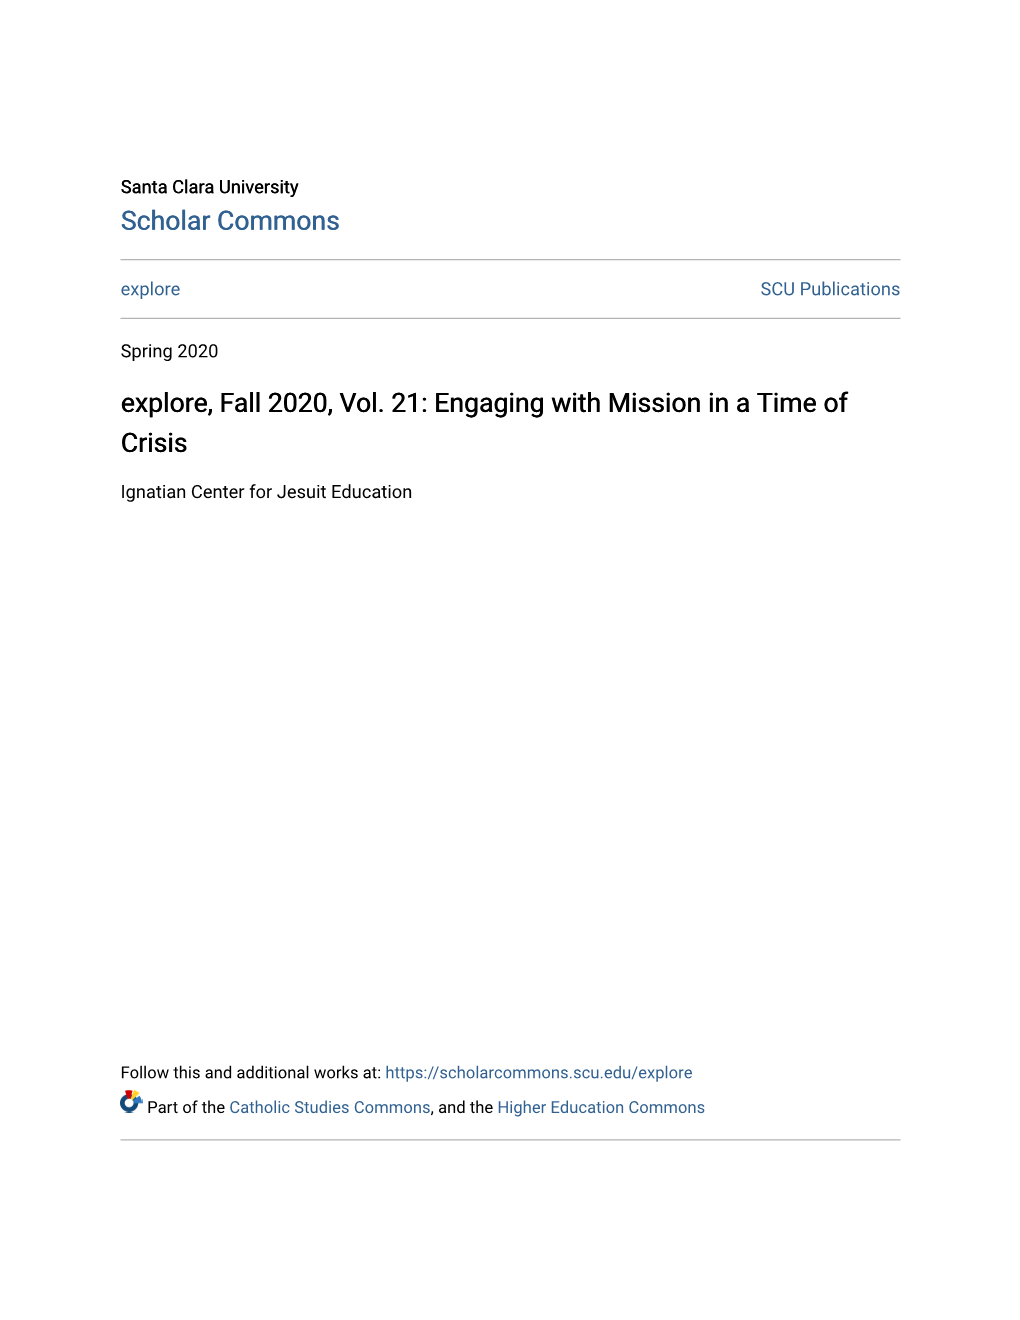 Explore, Fall 2020, Vol. 21: Engaging with Mission in a Time of Crisis